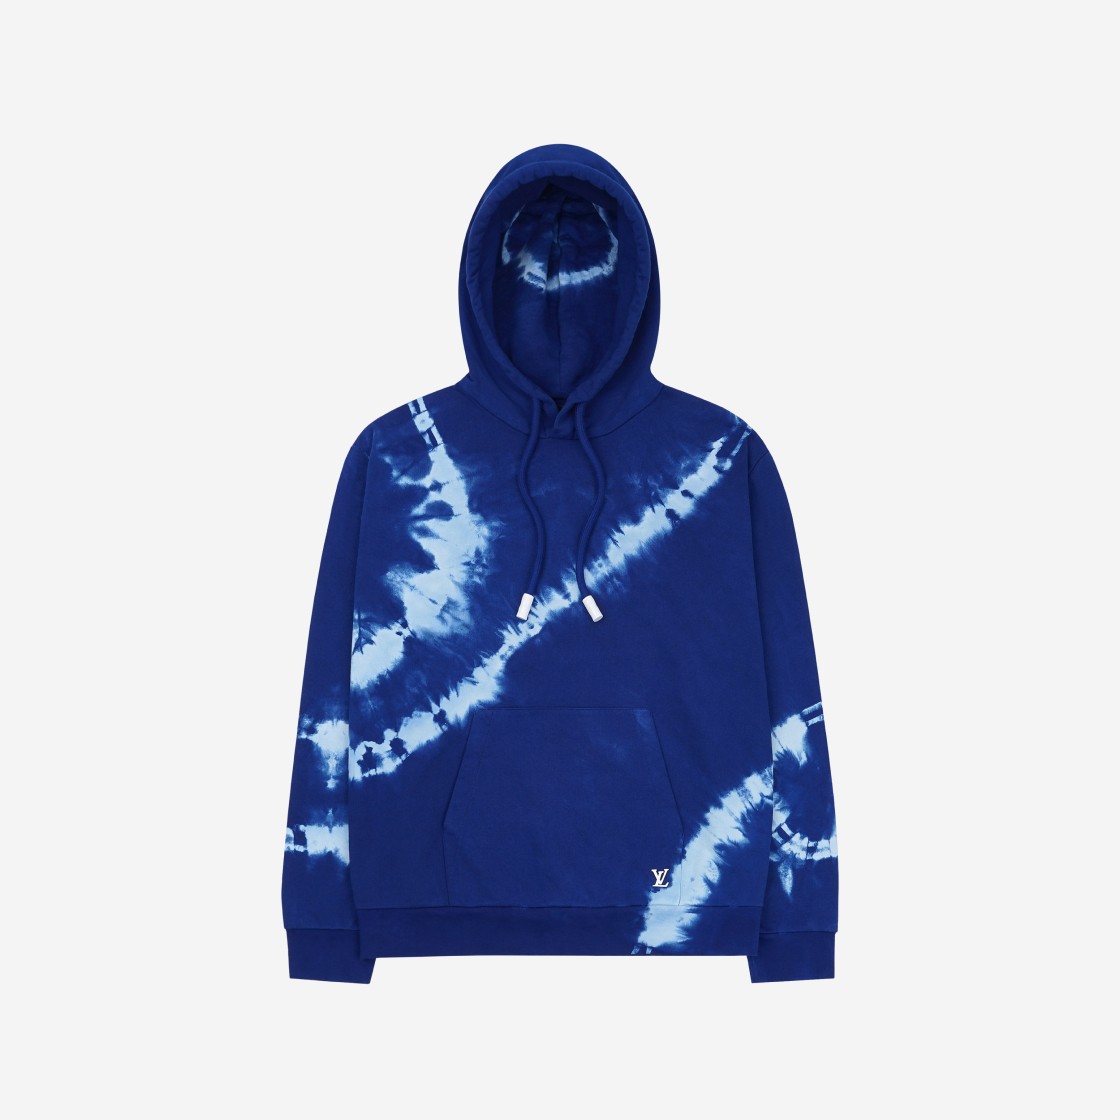 Louis Vuitton Tie&Dye Hoodie With LV Signature Heather/Grey/Blue for Women